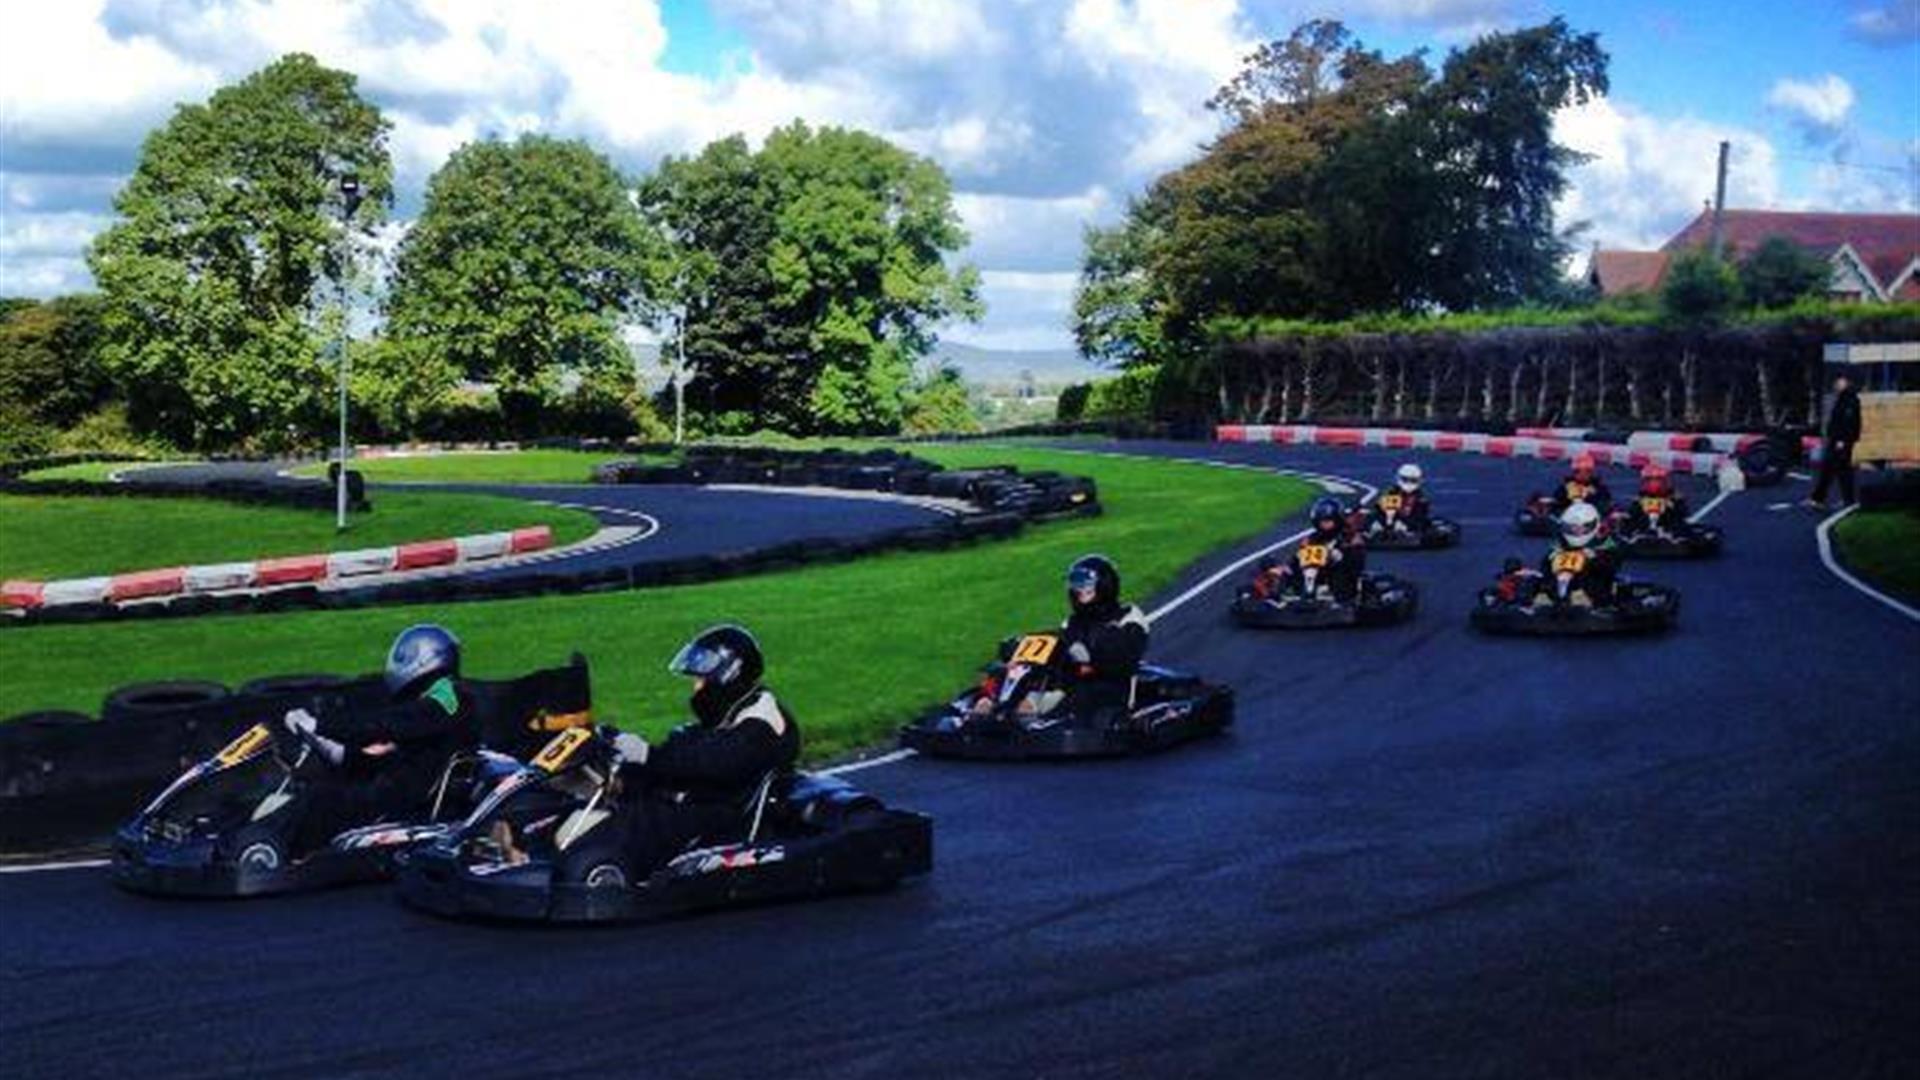 Image is of various people racing go-karts on an outdoor track